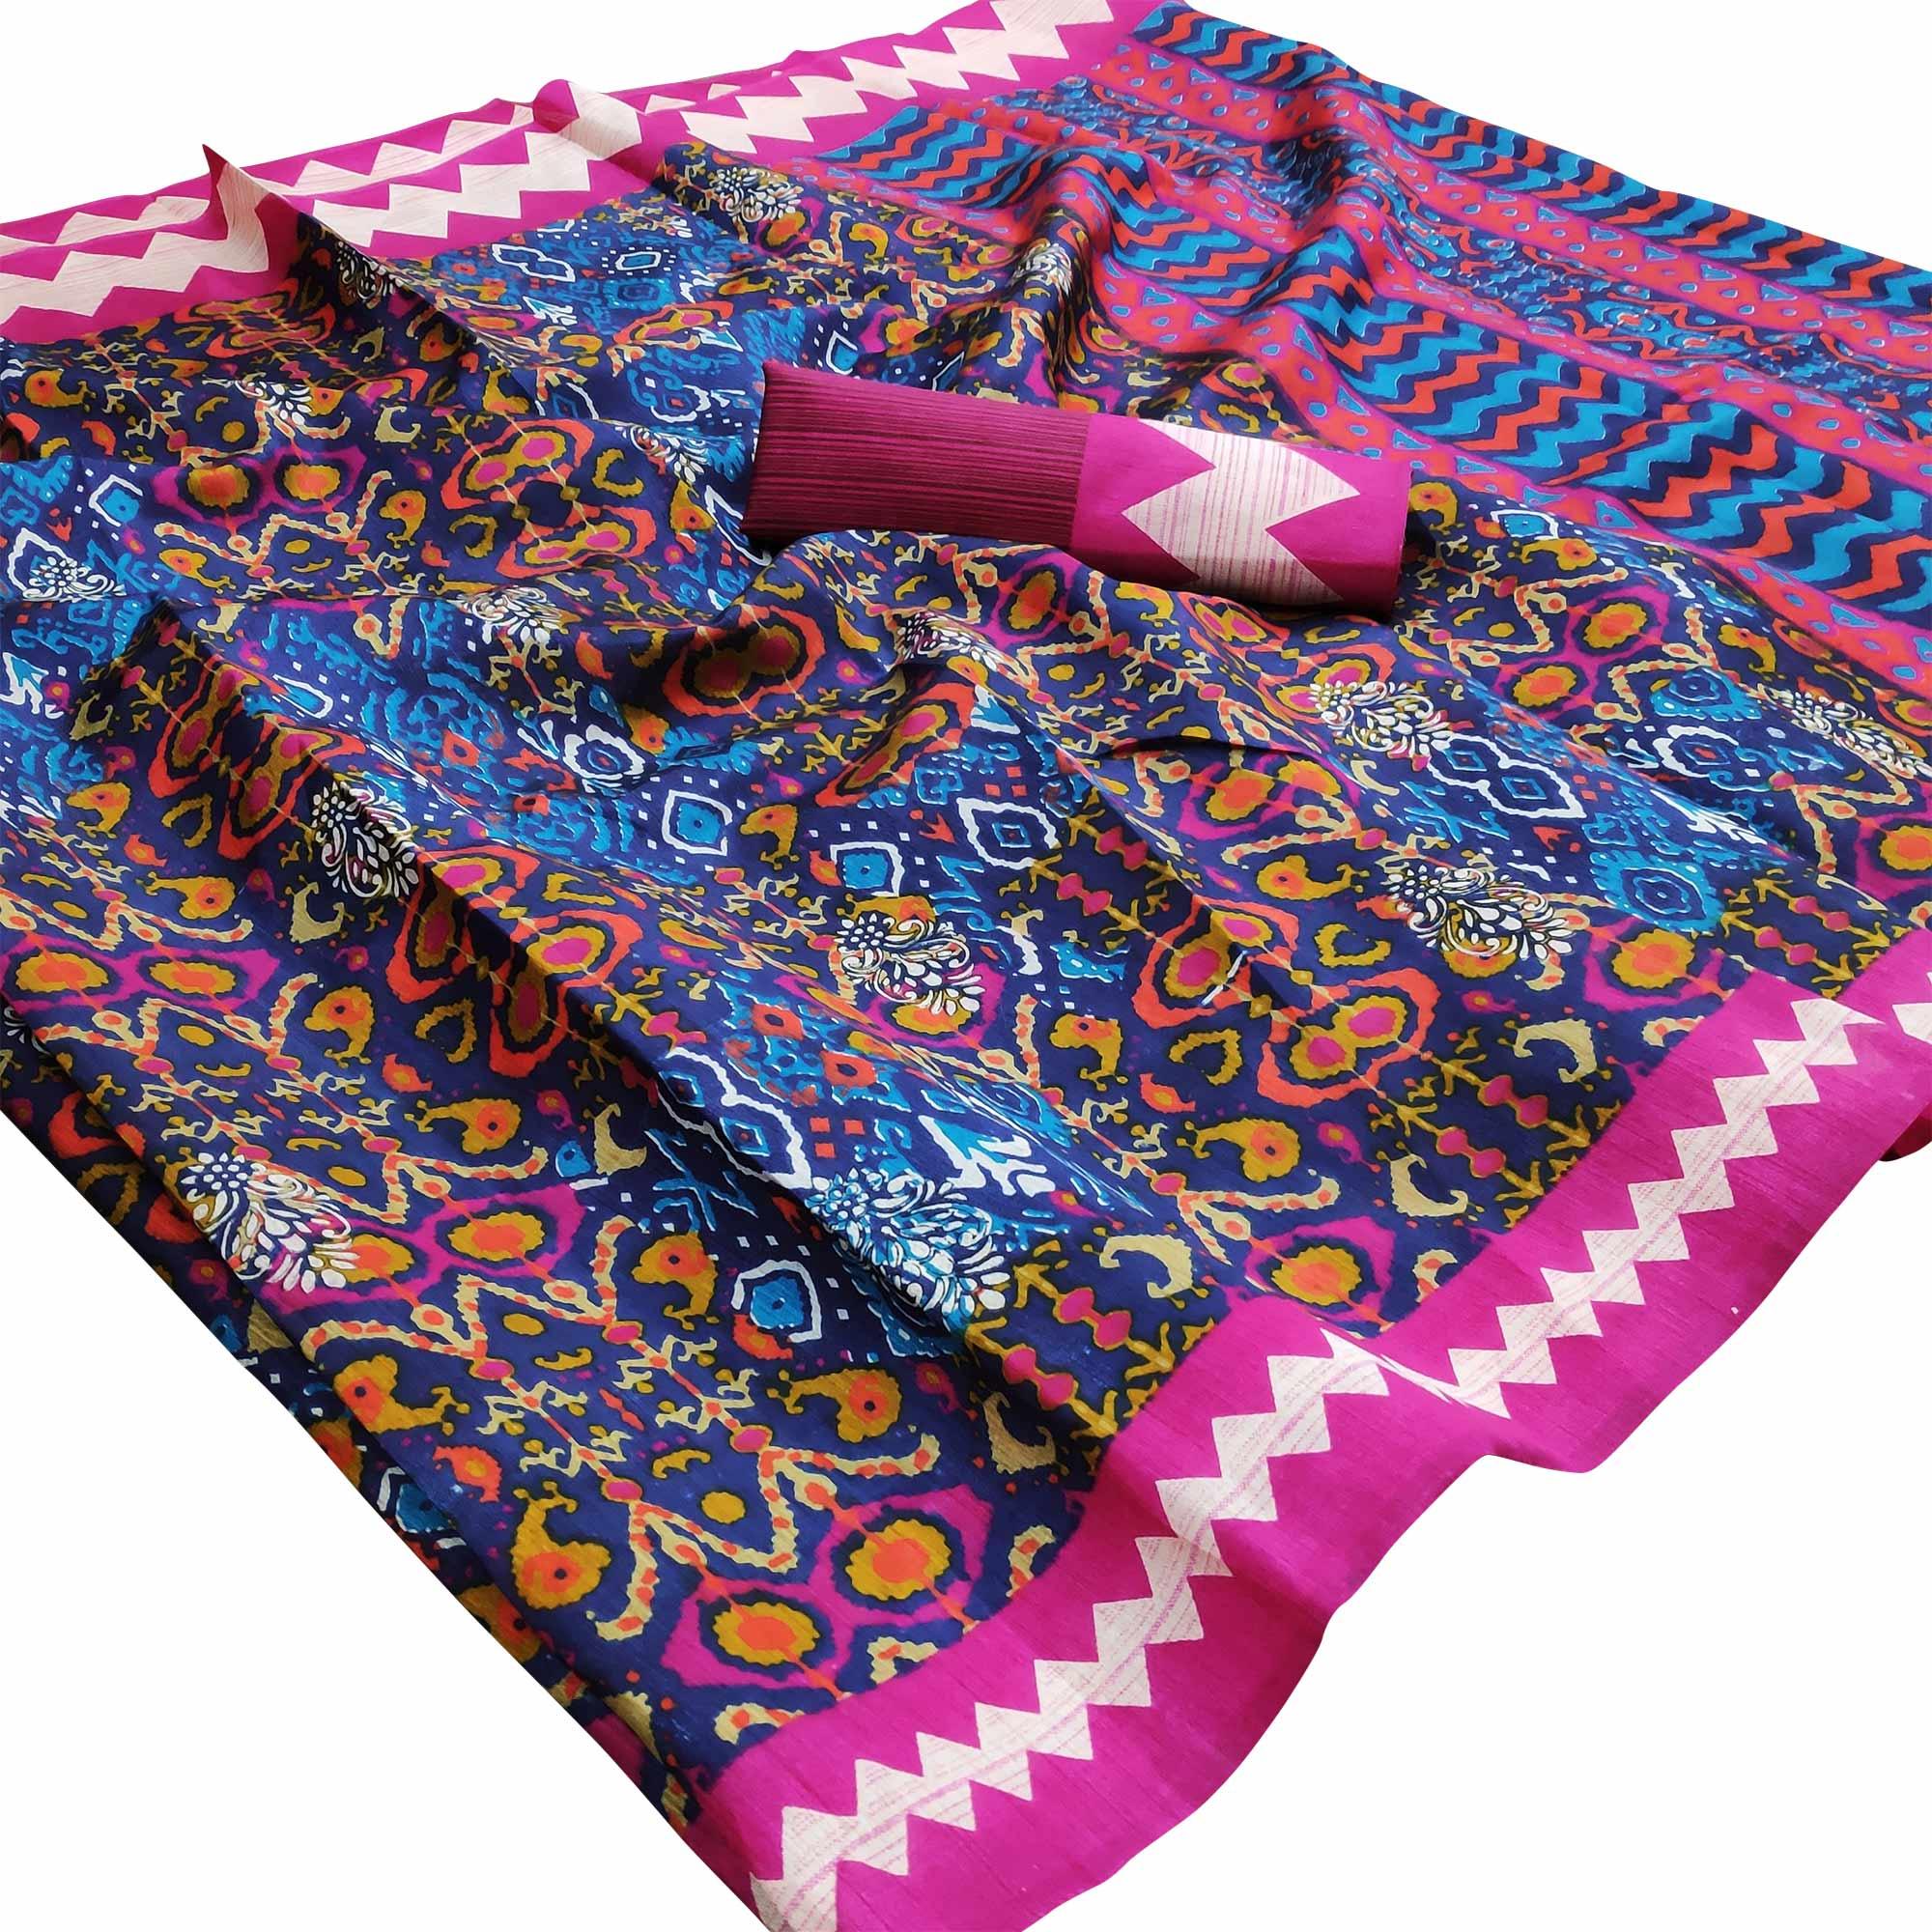 Exclusive Navy Blue - Pink Colored Casual Wear Printed Art Silk Saree - Peachmode